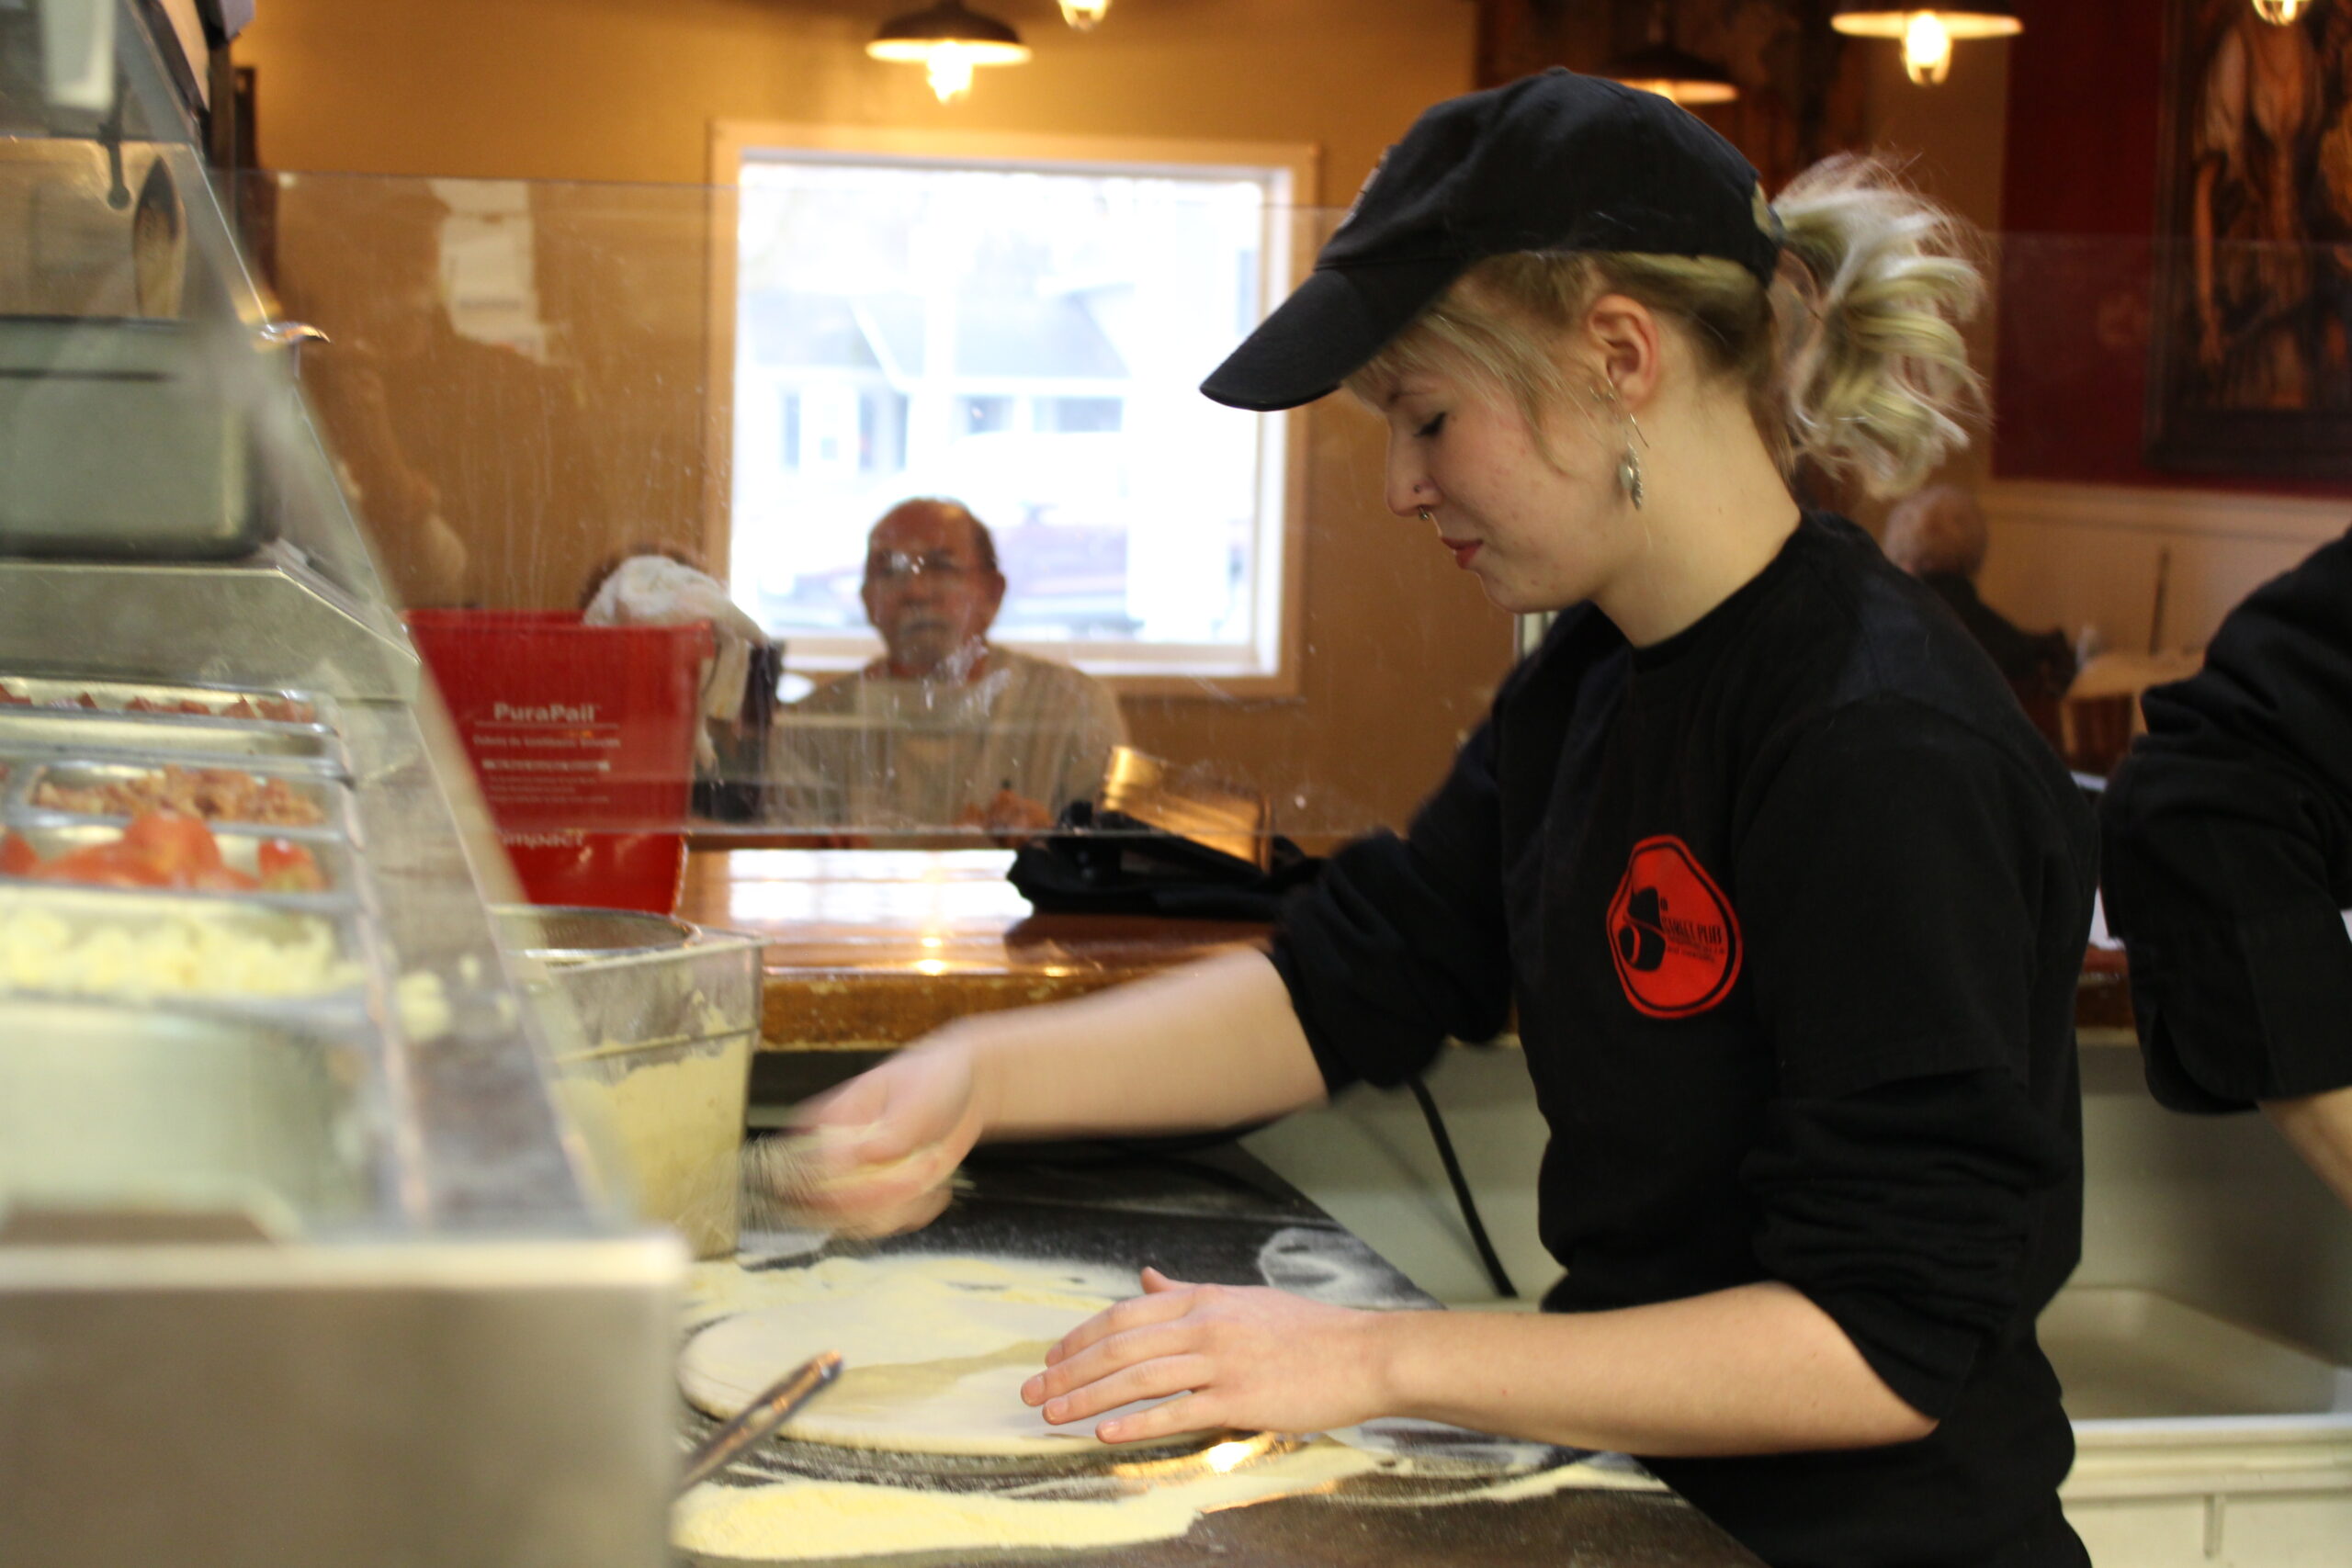 Sophie Rahe sprinkles cheese on pizza dough